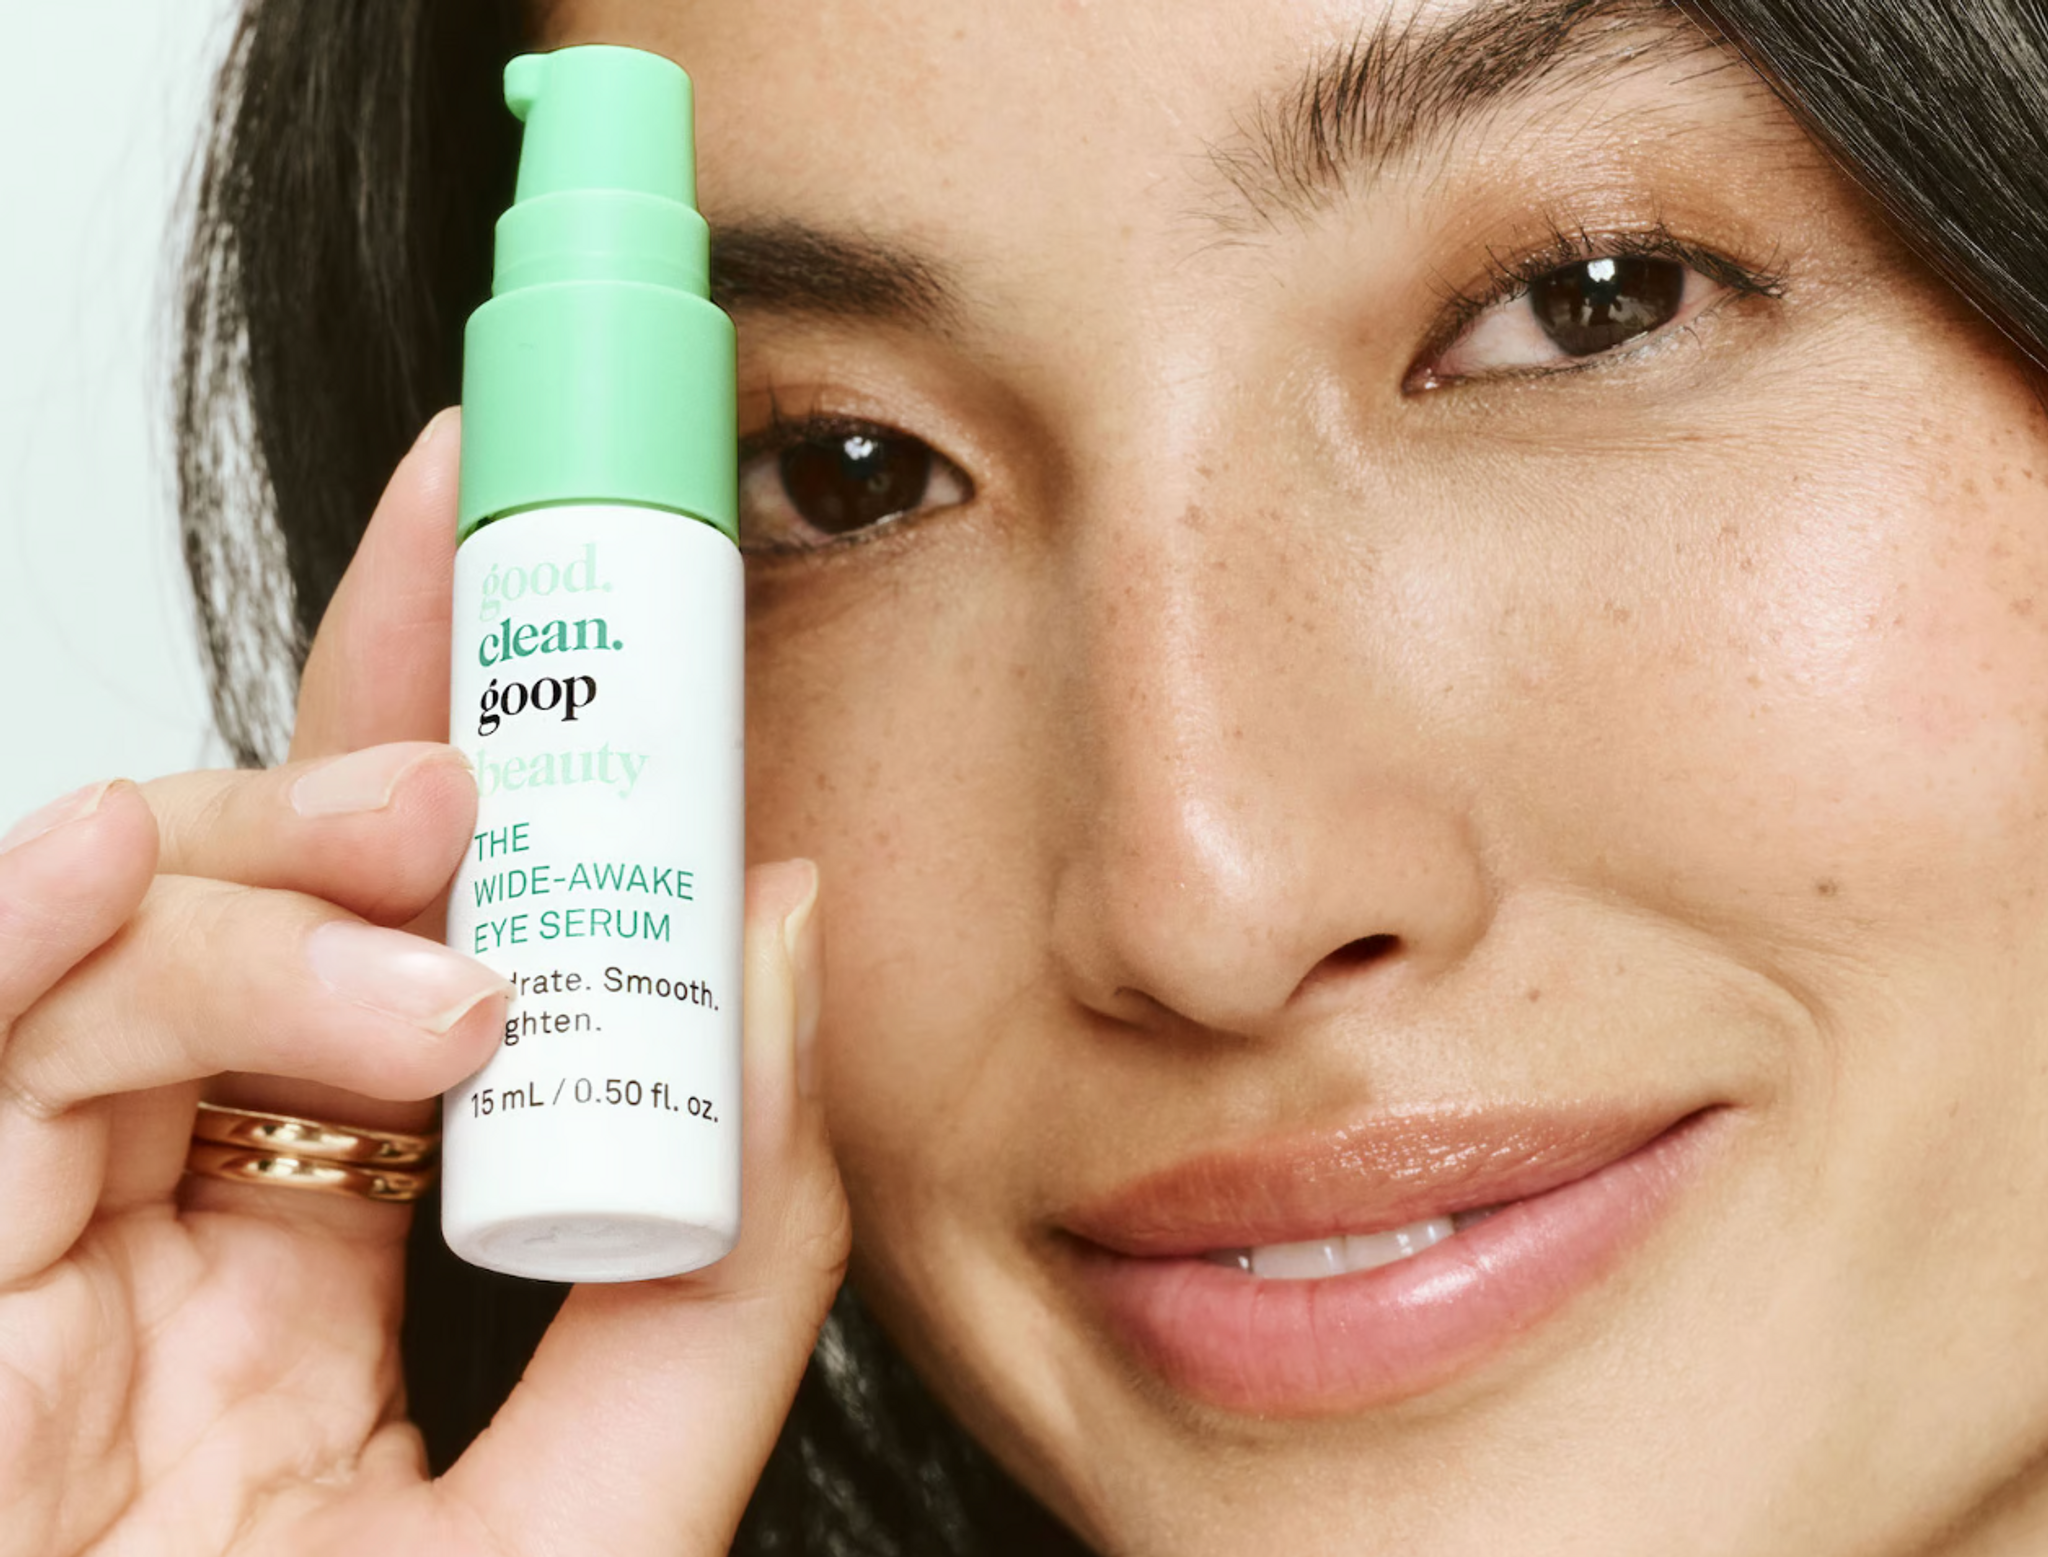 Good.Clean.Goop brings high-end skincare to the masses